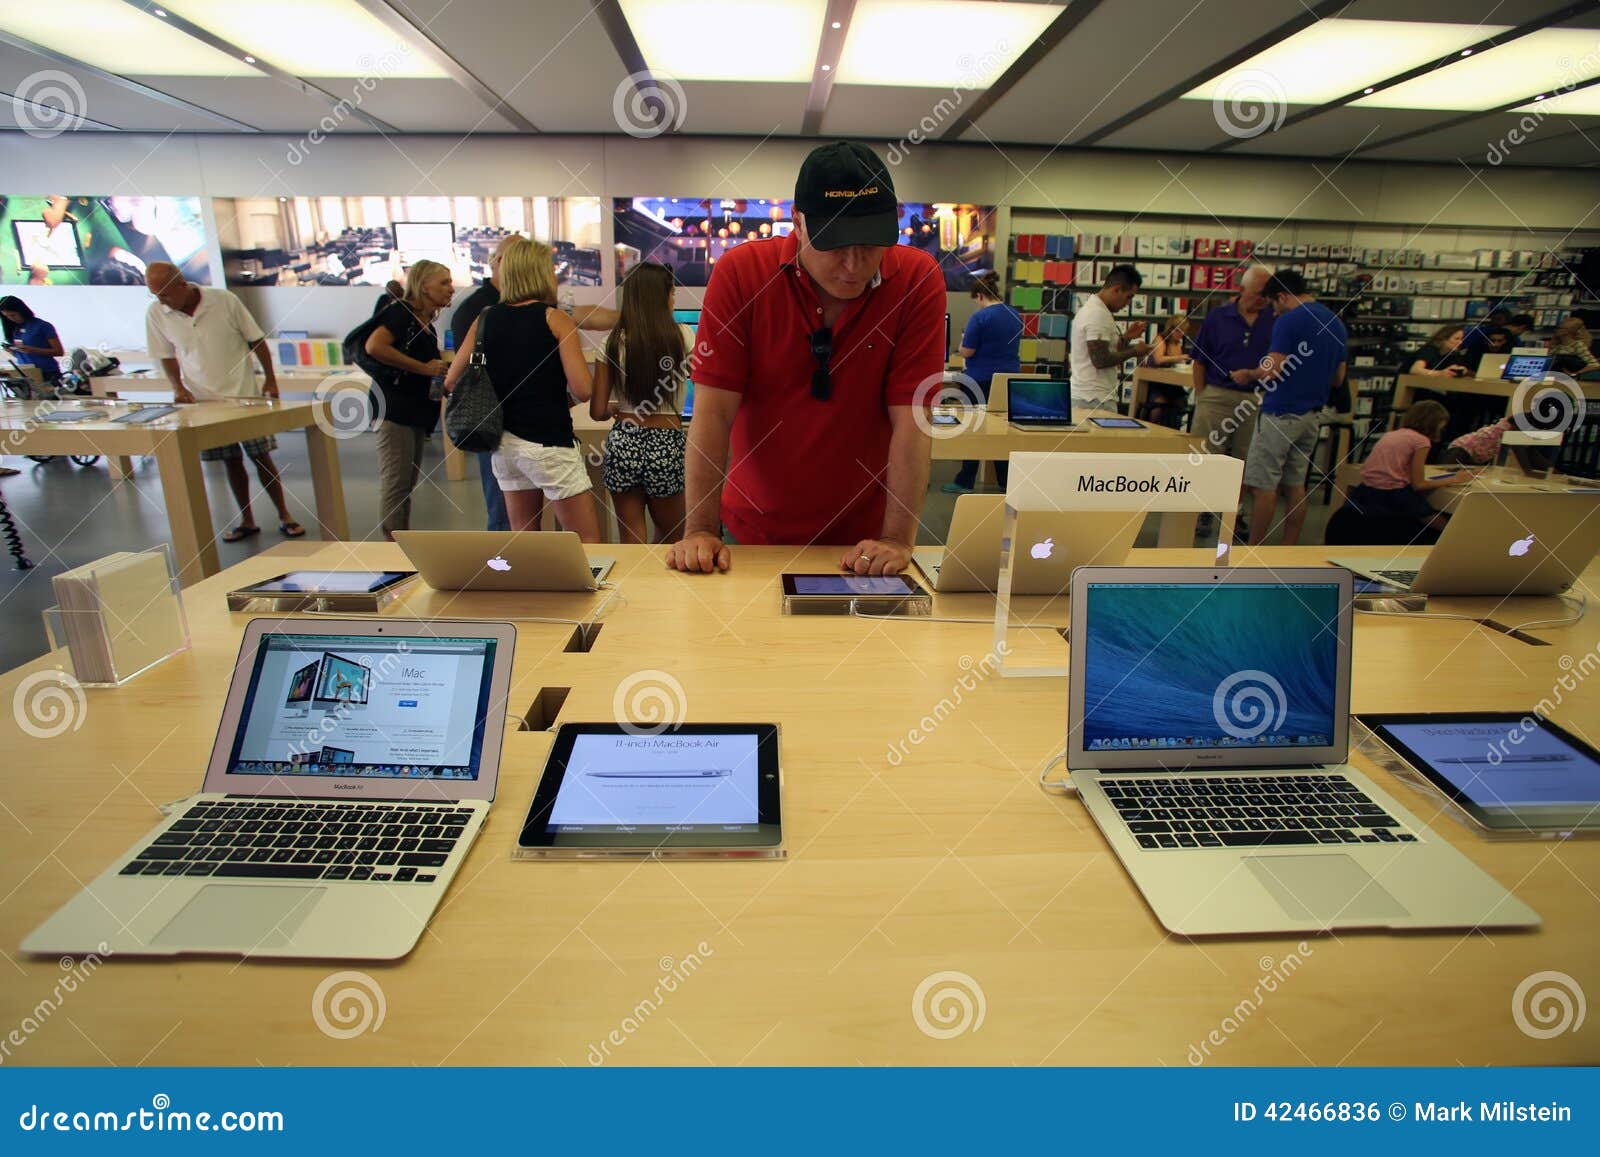 APPLE COMPUTER RETAIL STORE Editorial Photo - Image of computers